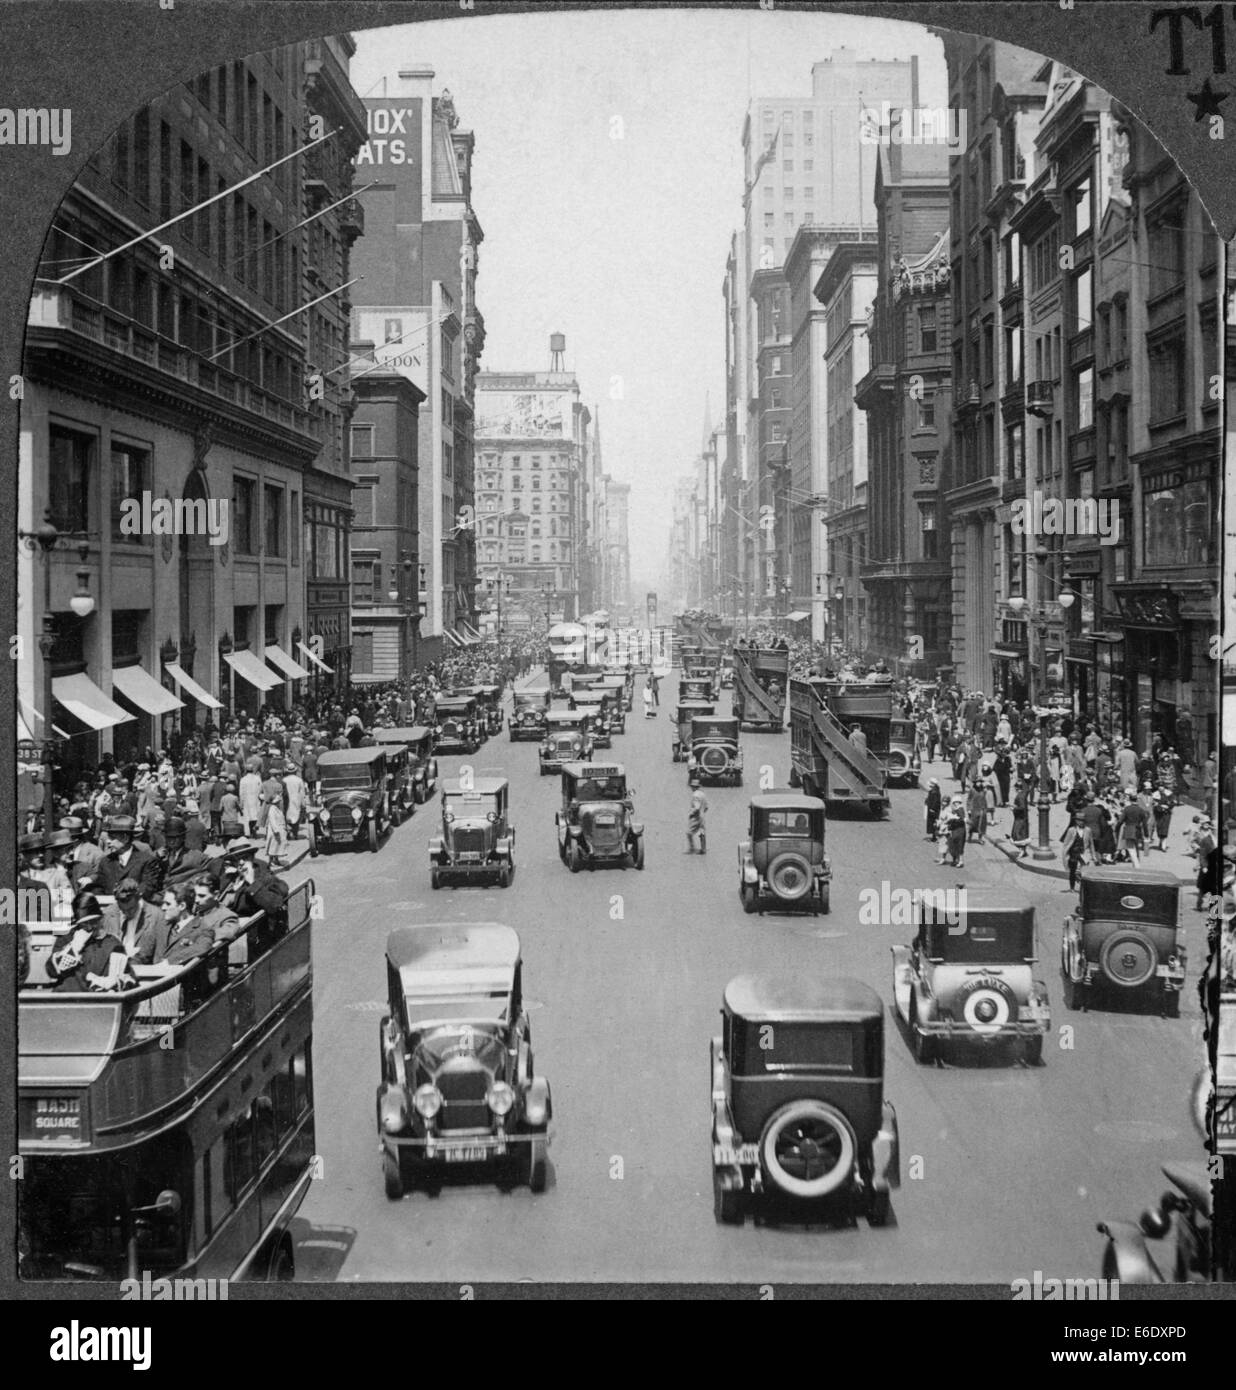 Busy Street Scene, Fith Avenue Looking North From 38th Street, New York City, USA, Single Image of Stereo Card, circa 1920's Stock Photo